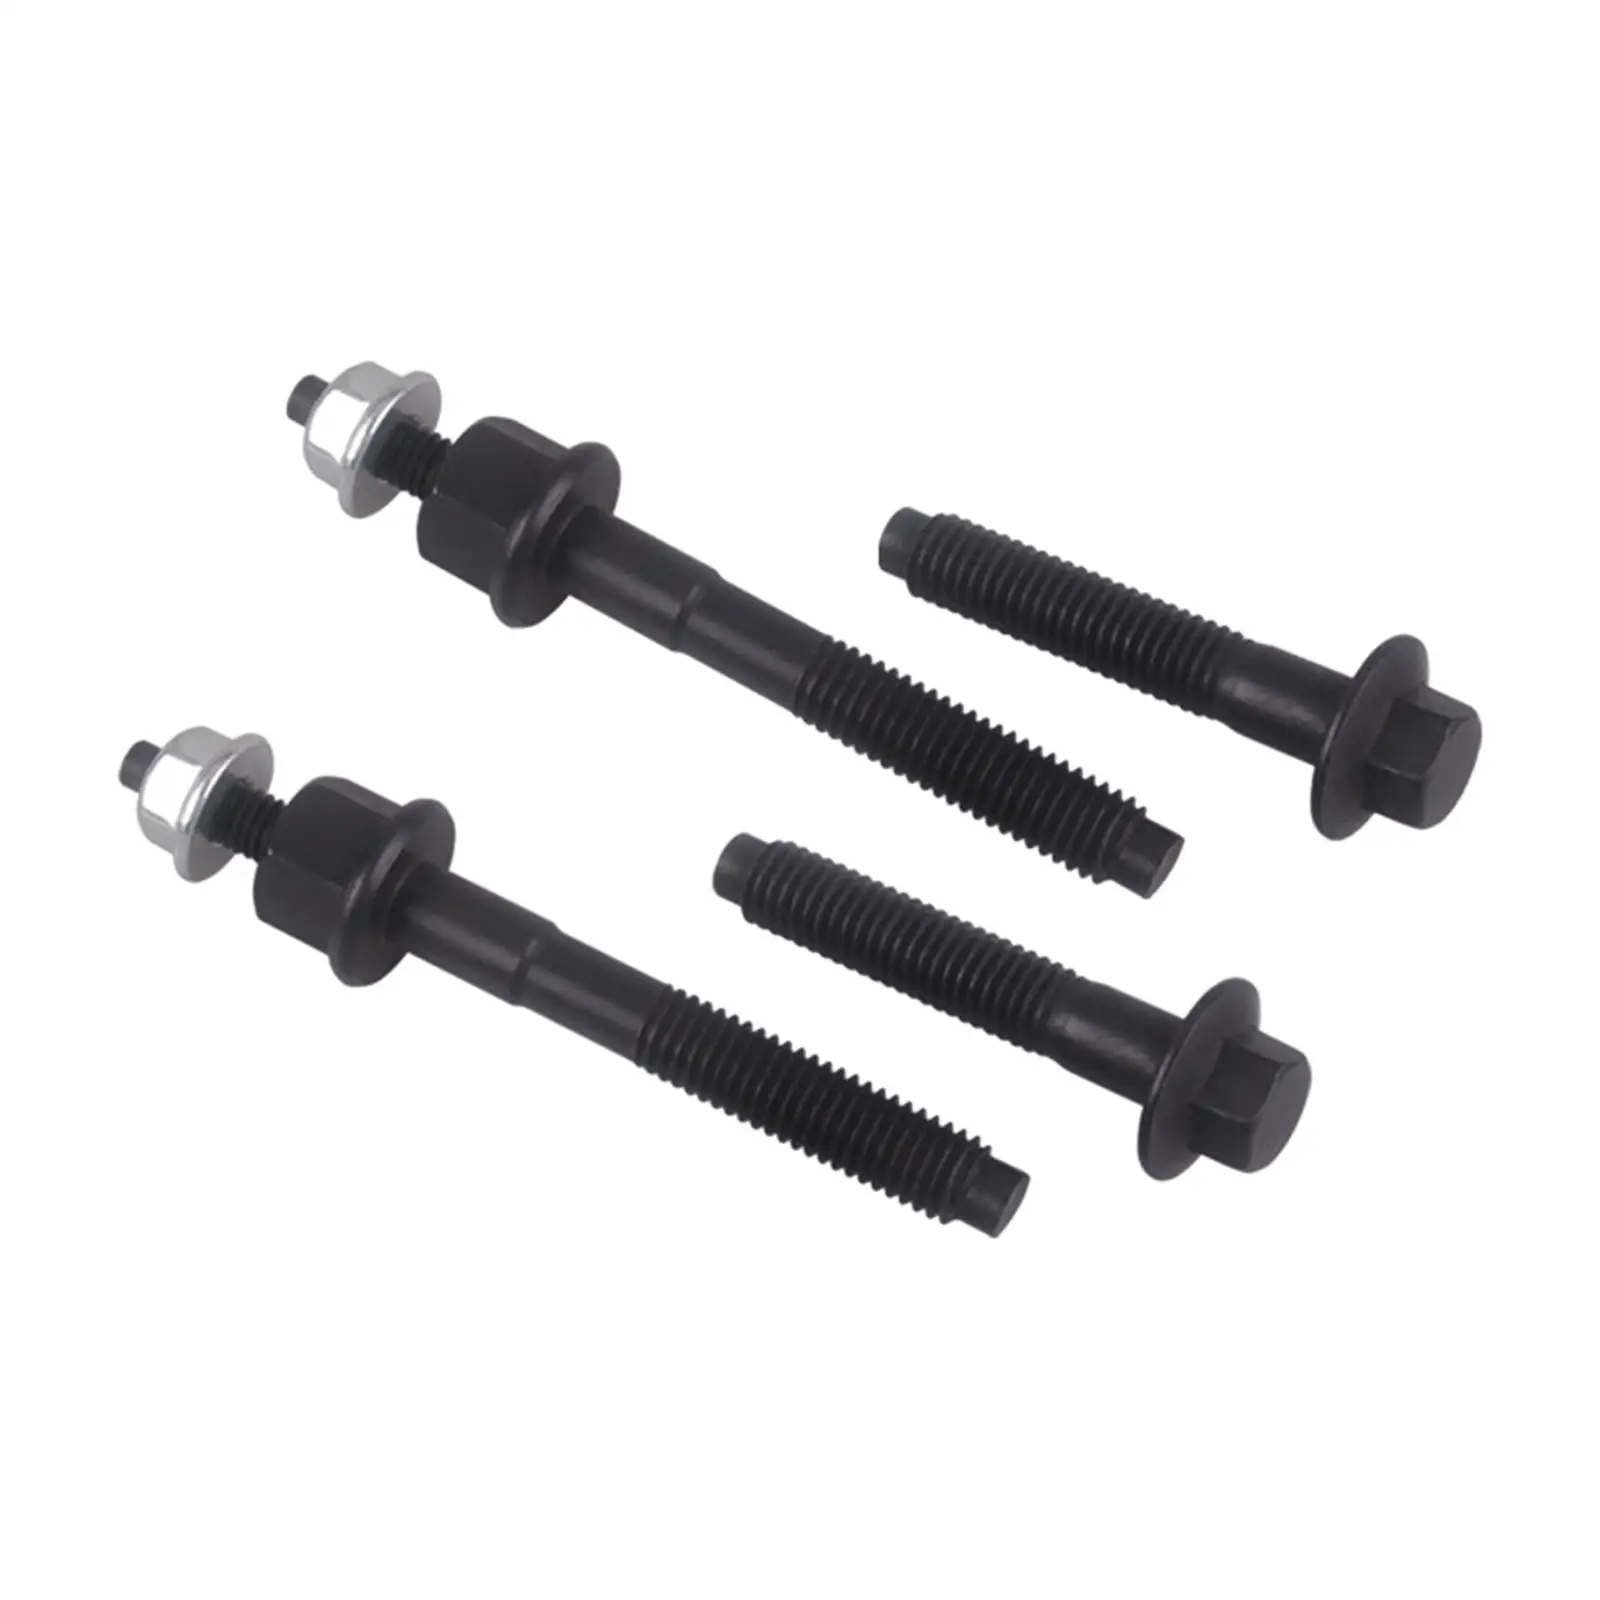 Exhaust Manifold Bolts and Nuts Equipment Spare Parts 1 Set Premium Professional Replace for 1500 2500 3500 5.7L Automotive